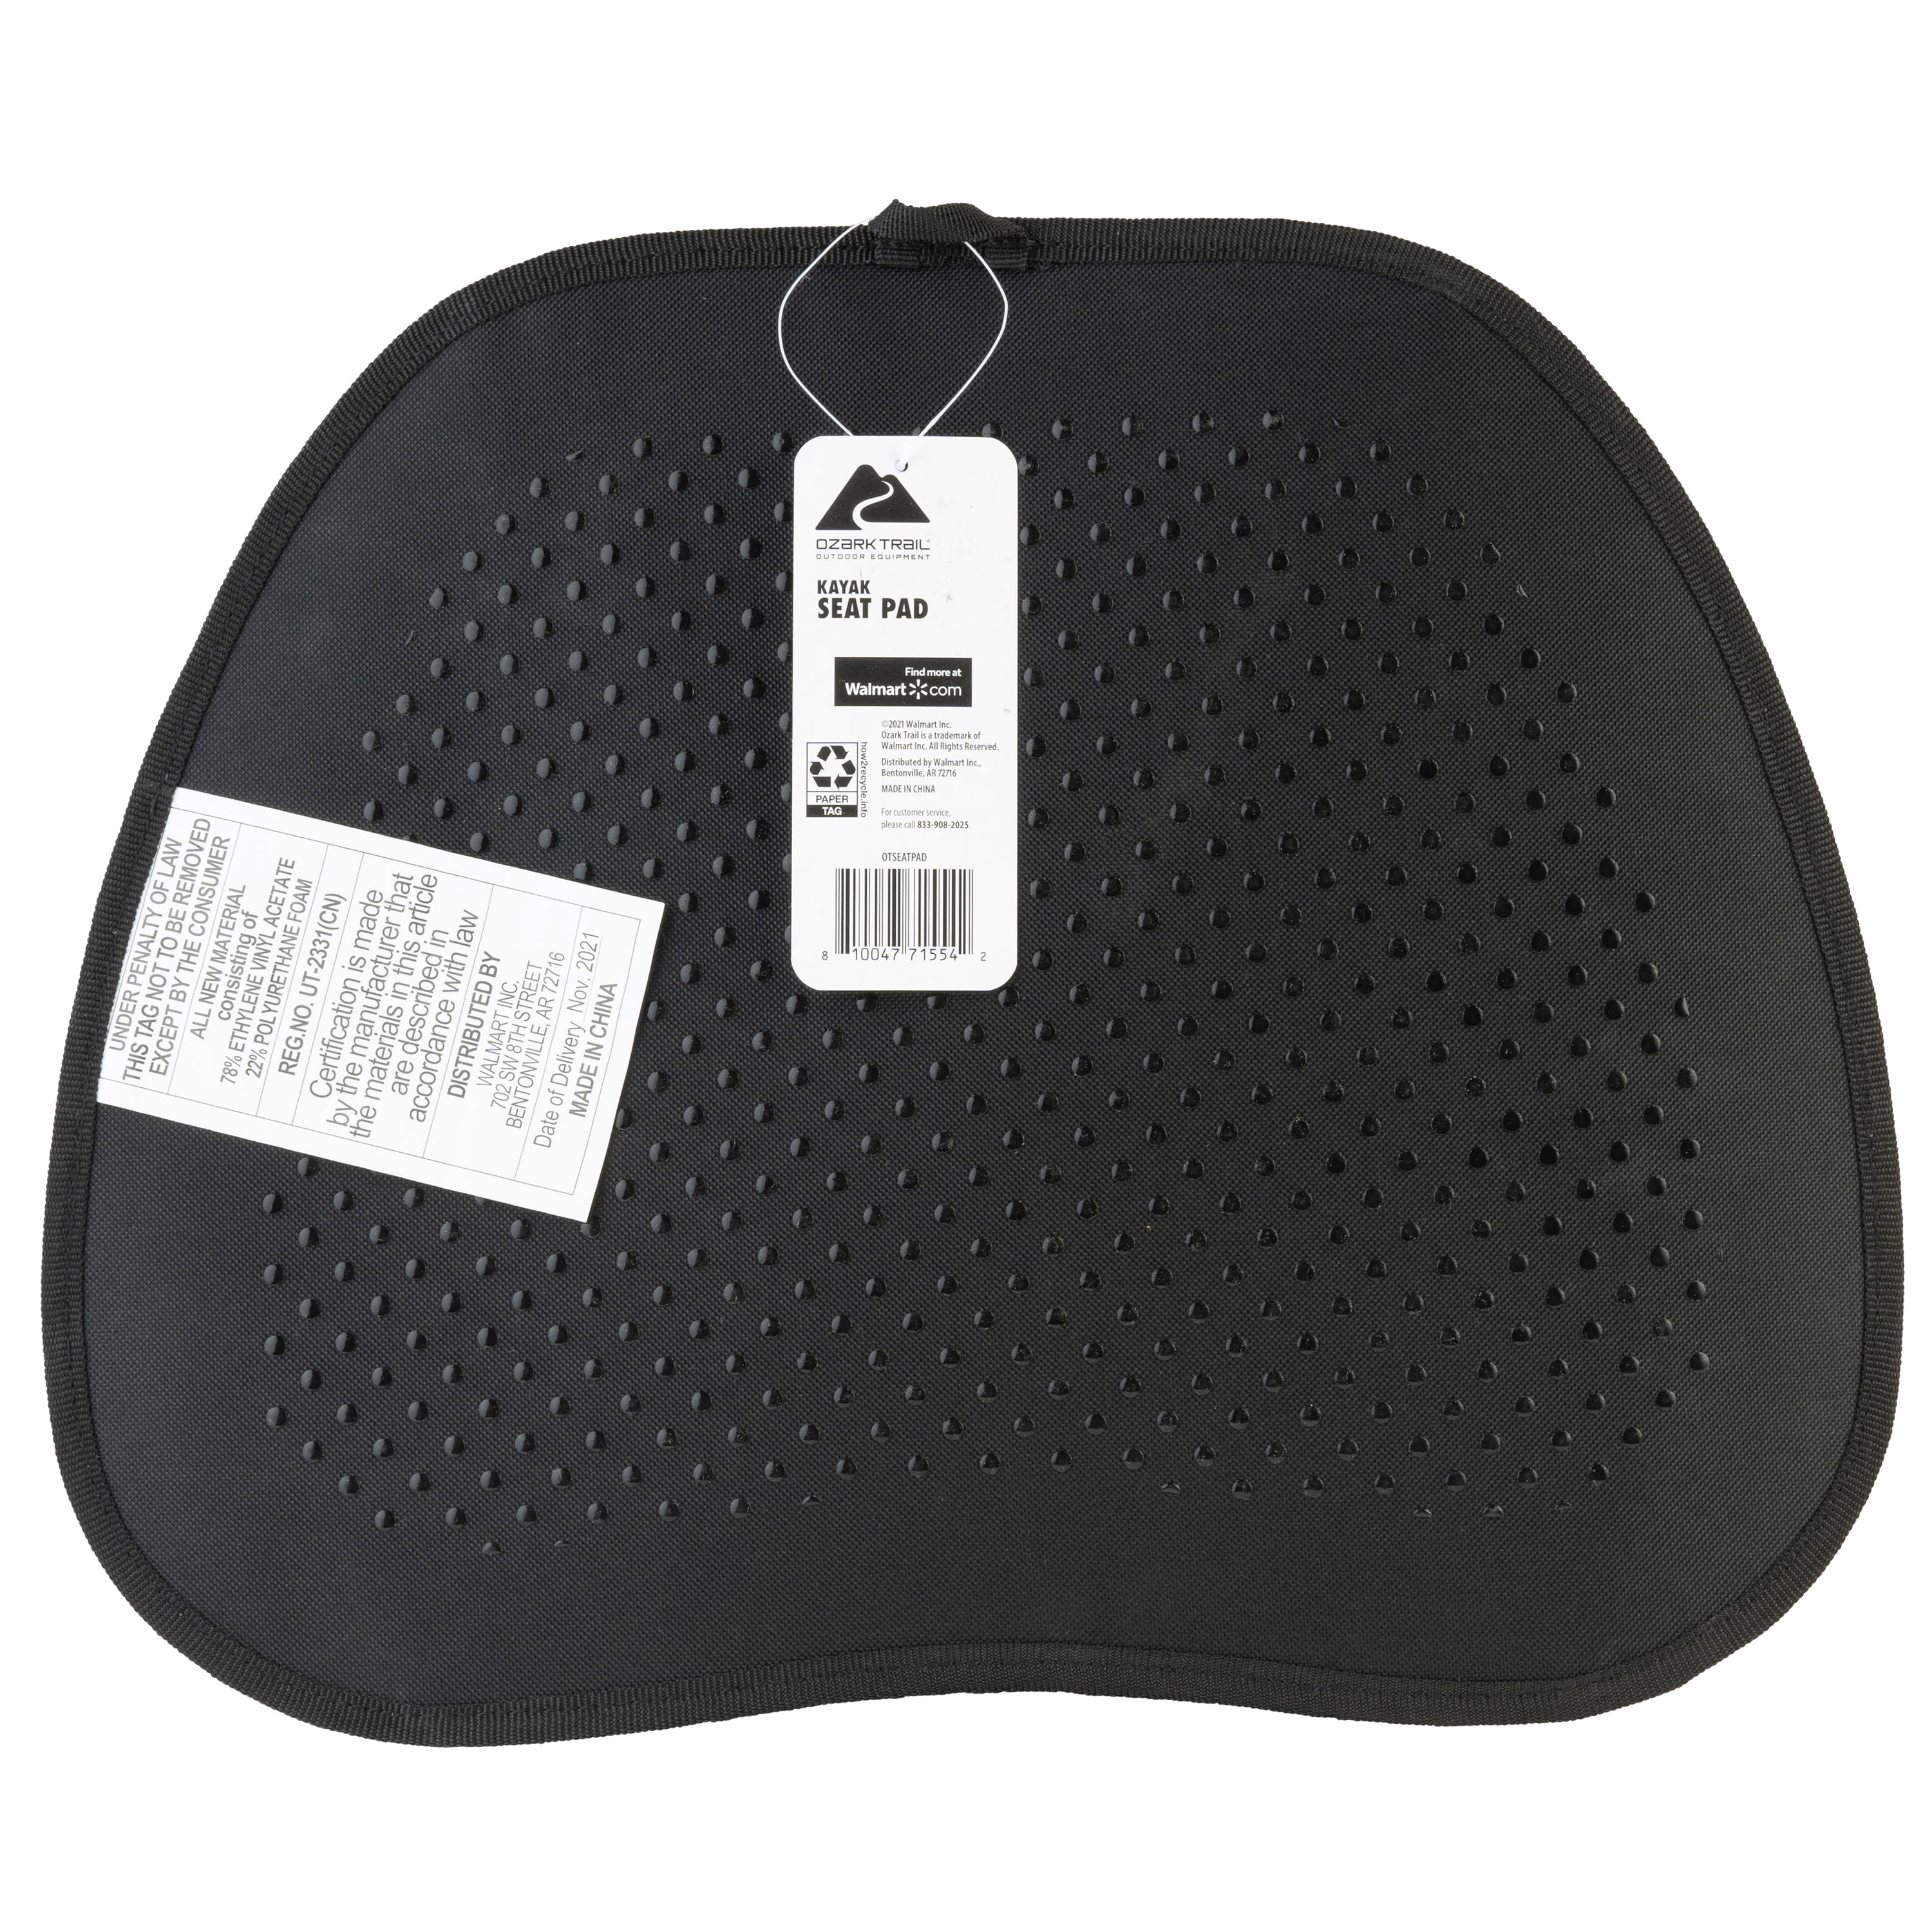 TechLift Kayak Seat Pad by Harmony Gear, Wilderness Systems Kayaks